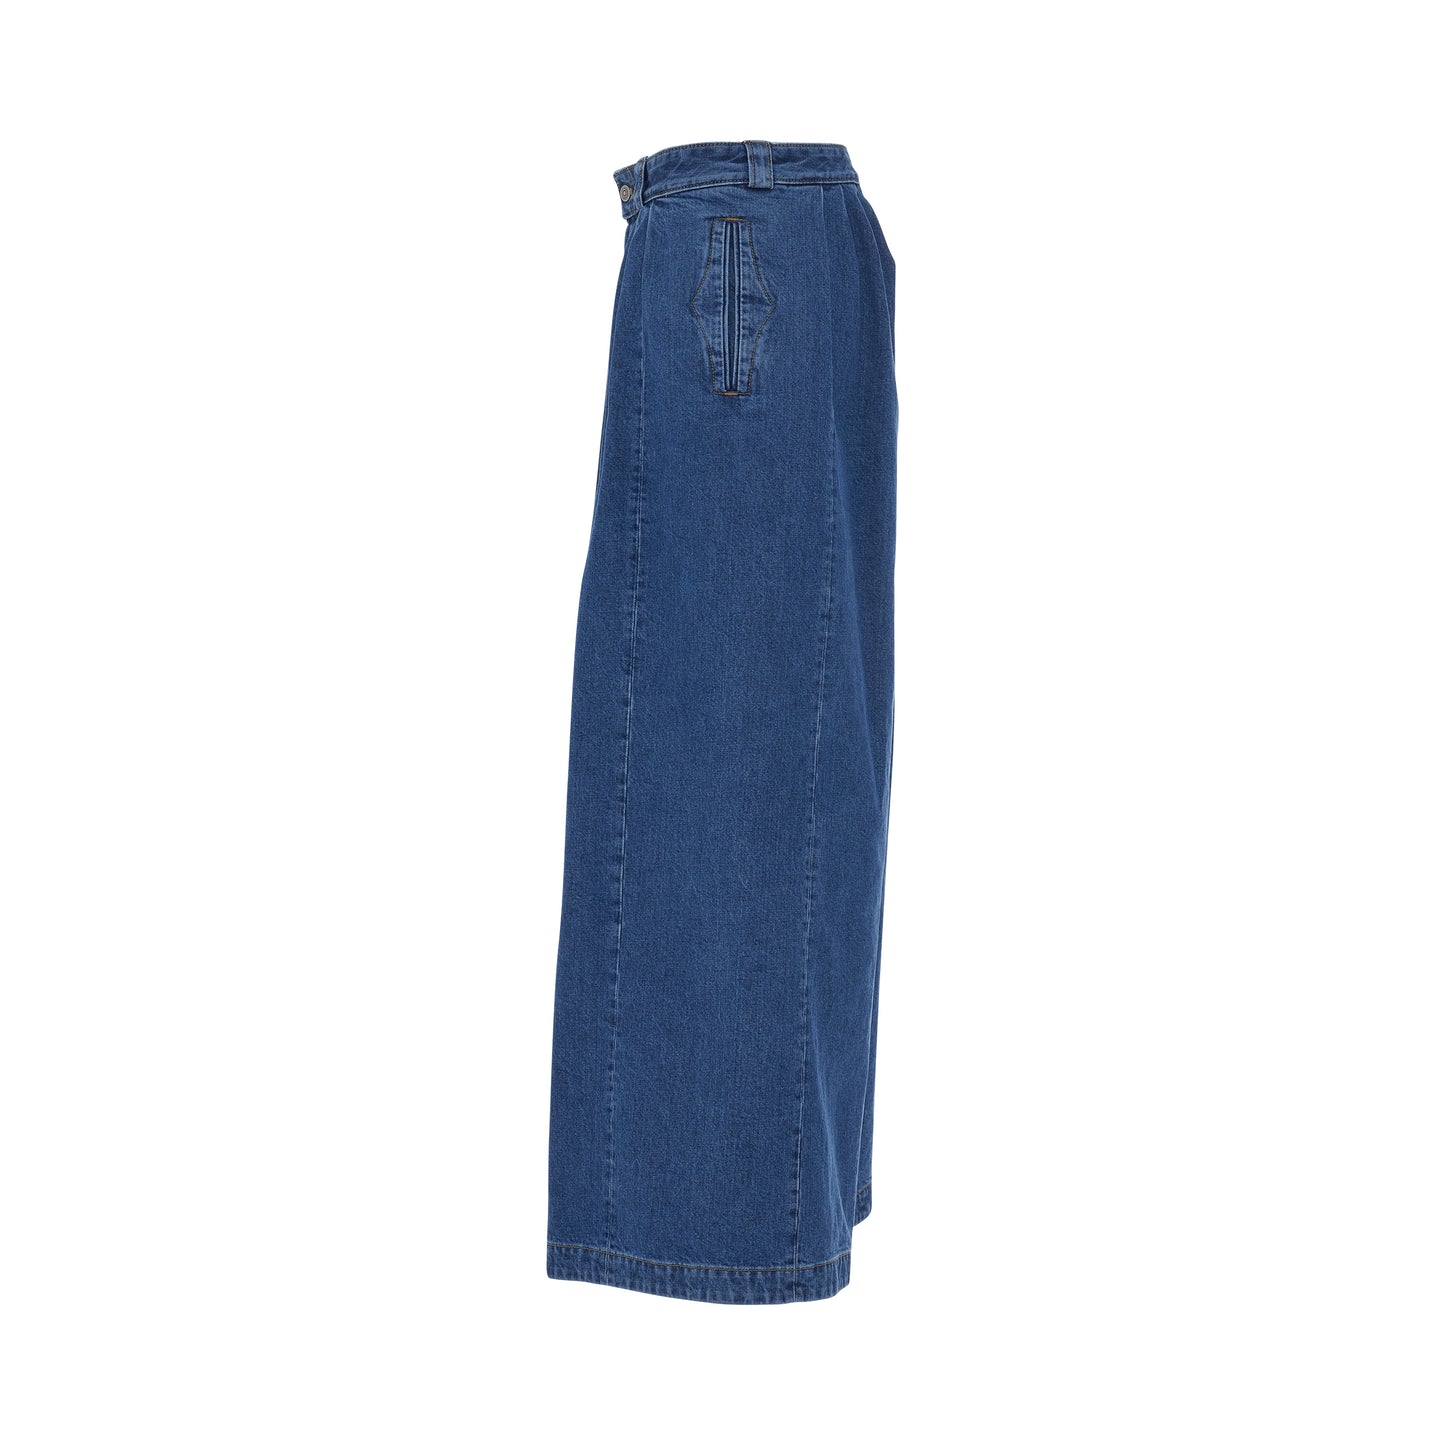 Long Baggy Straight Jeans in Light Dirty Stone Wash